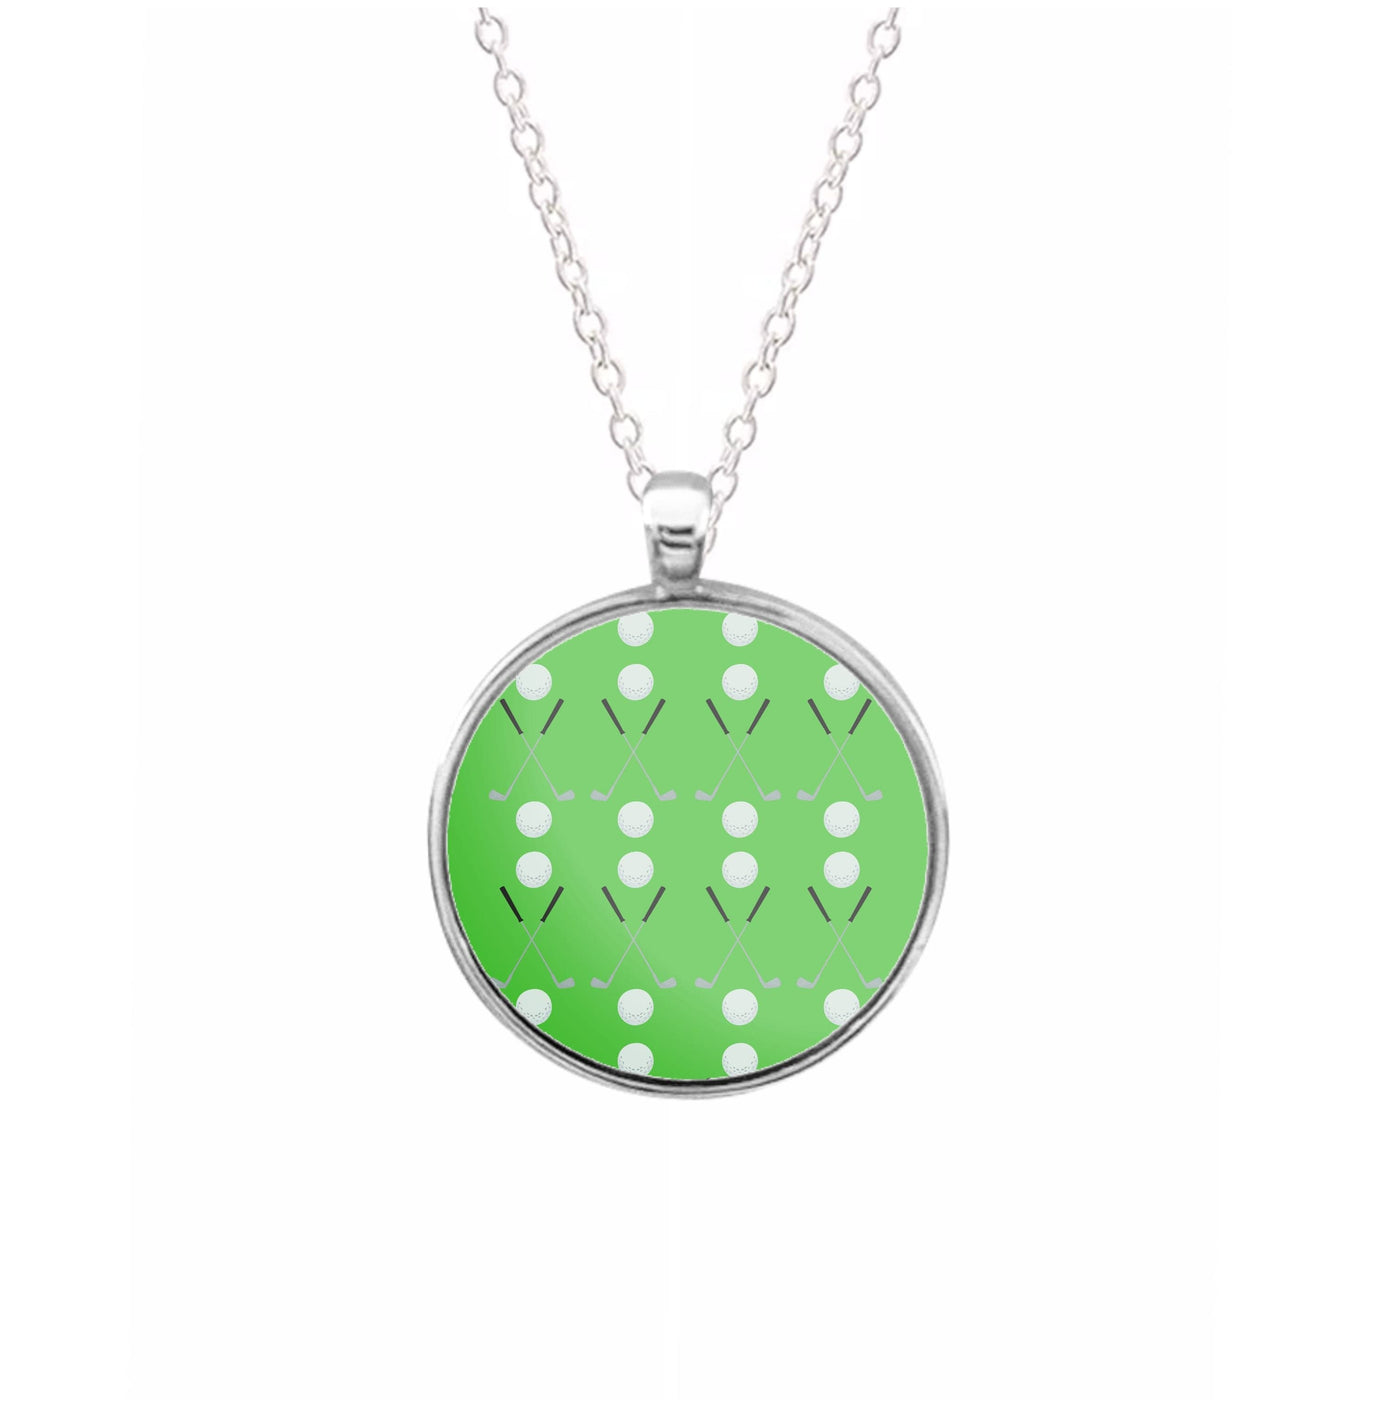 Golf clubs Necklace